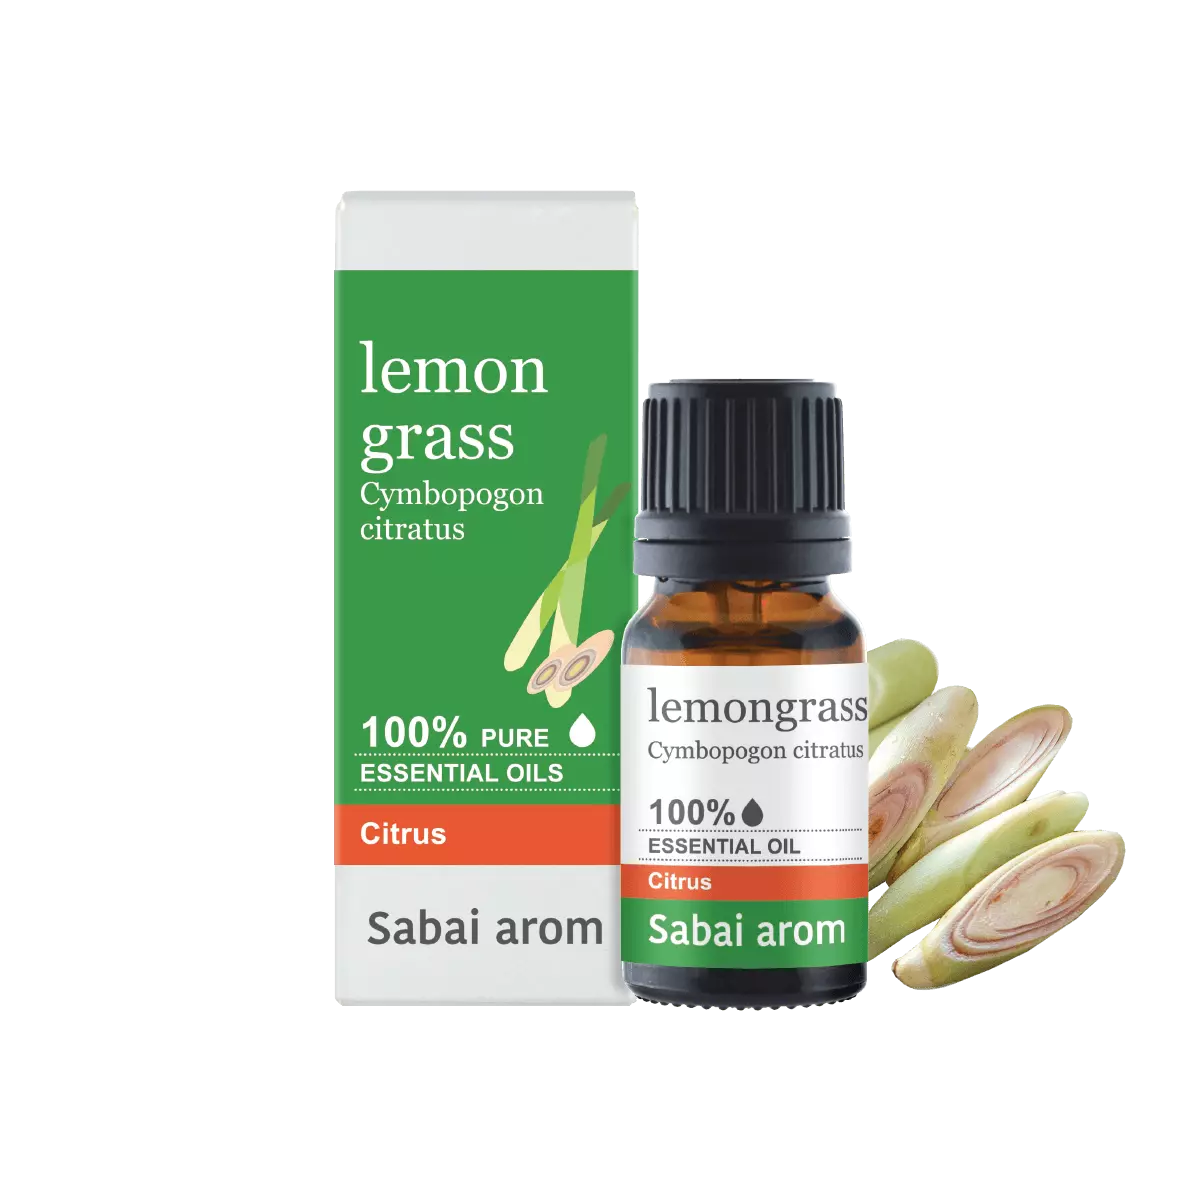 essential oil lemongrass <h2>100% Pure Essential Oil</h2> <em><strong>Cymbopogon Flexuosus</strong></em> <strong>Source : </strong>Thailand Lemongrass oil has a fresh lemony smell with grassy undertones. It has outstanding healing properties in dusting negative thoughts and inspiring us to see goodness in life. As well as getting us out of thinking traps that freeze our advancement and helping create a logical balance between ration and desire. Physically, Thai Lemongrass oil can soothe headache, stiff muscles and joint pain effectively. It is used as an oil controller and skin tightener for those dealing with excessive oily skin. It is also an effective natural insecticide and can be massaged directly onto abdominal so as to stimulate better digestion. <strong>Scent : </strong>Strong herbal lemony scent with herbal oily dryout. <strong>Family : </strong>Citrus <strong>Note : </strong>Top to Middle